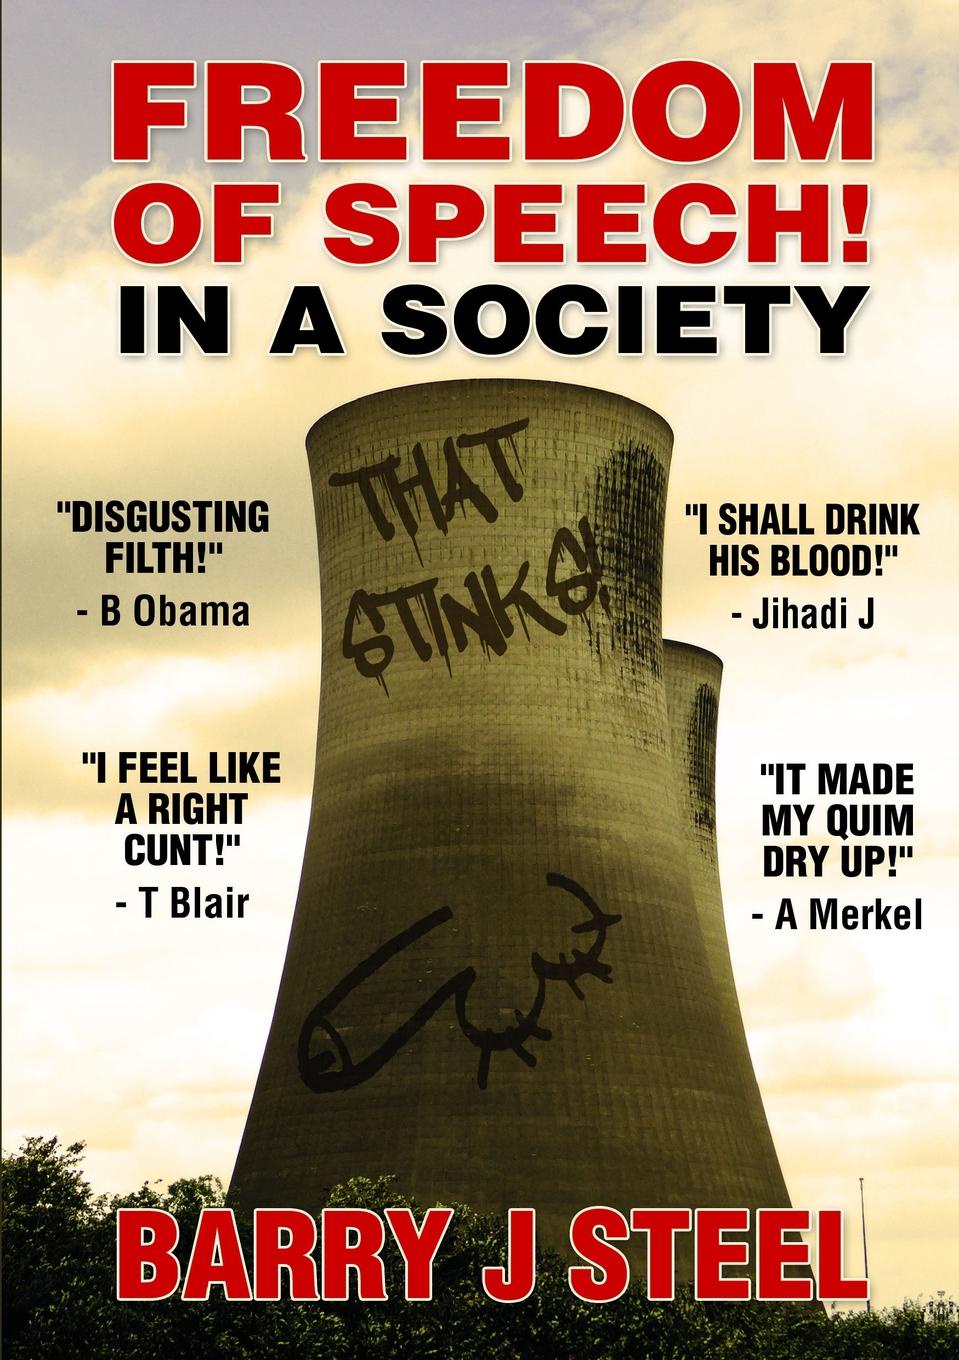 Freedom of Speech. In a society that stinks.